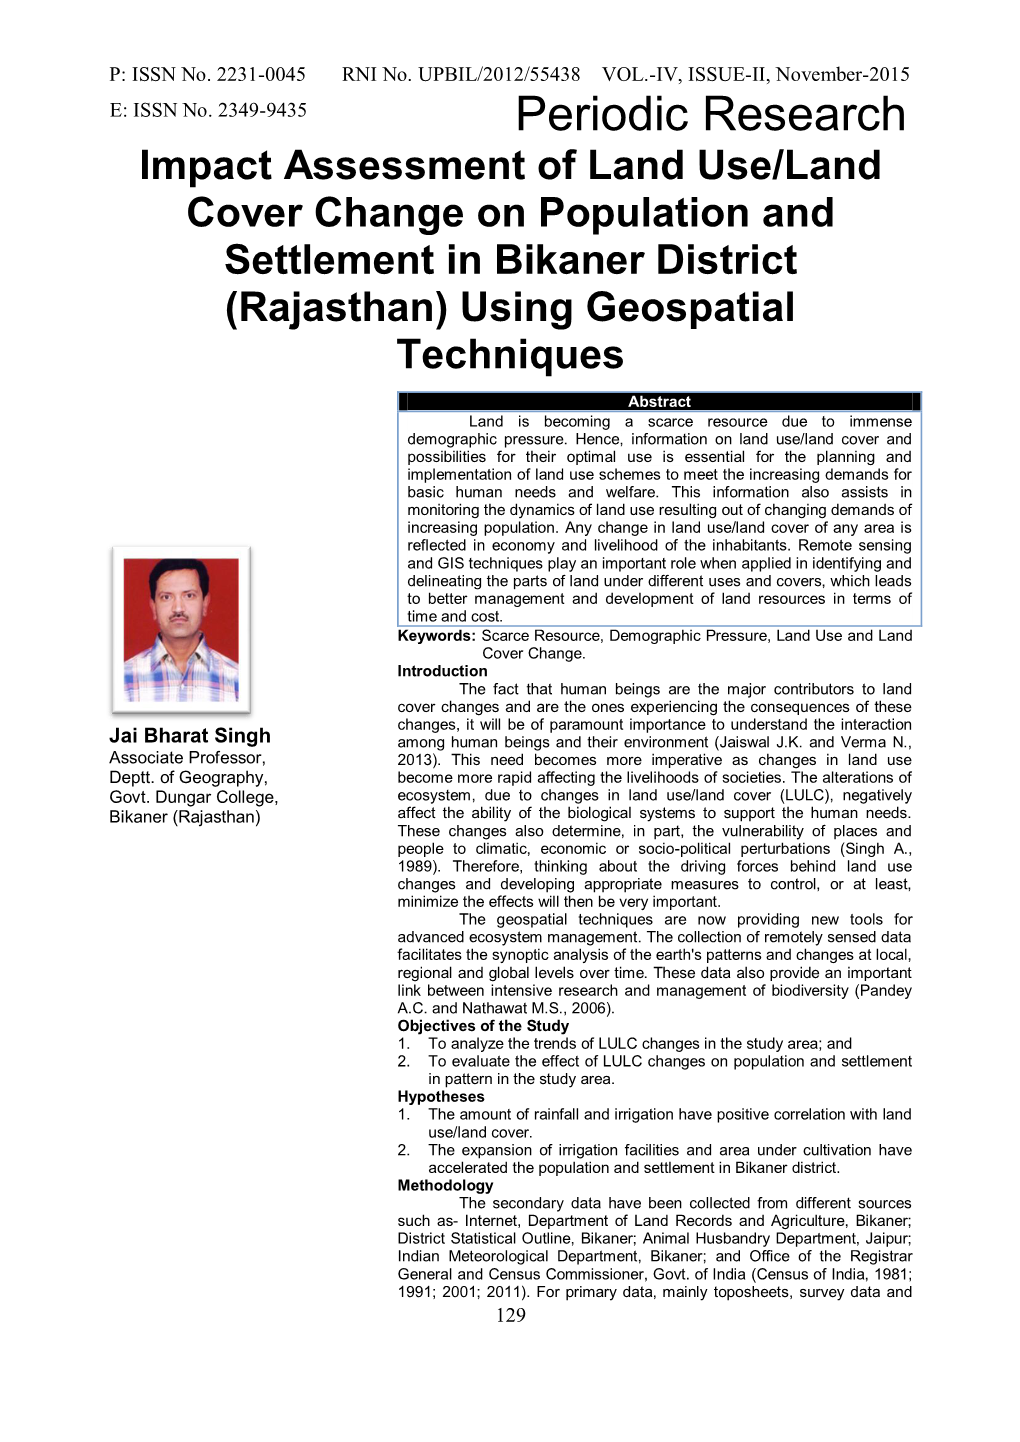 Impact Assessment of Land Use/Land Cover Change on Population and Settlement in Bikaner District (Rajasthan) Using Geospatial Techniques